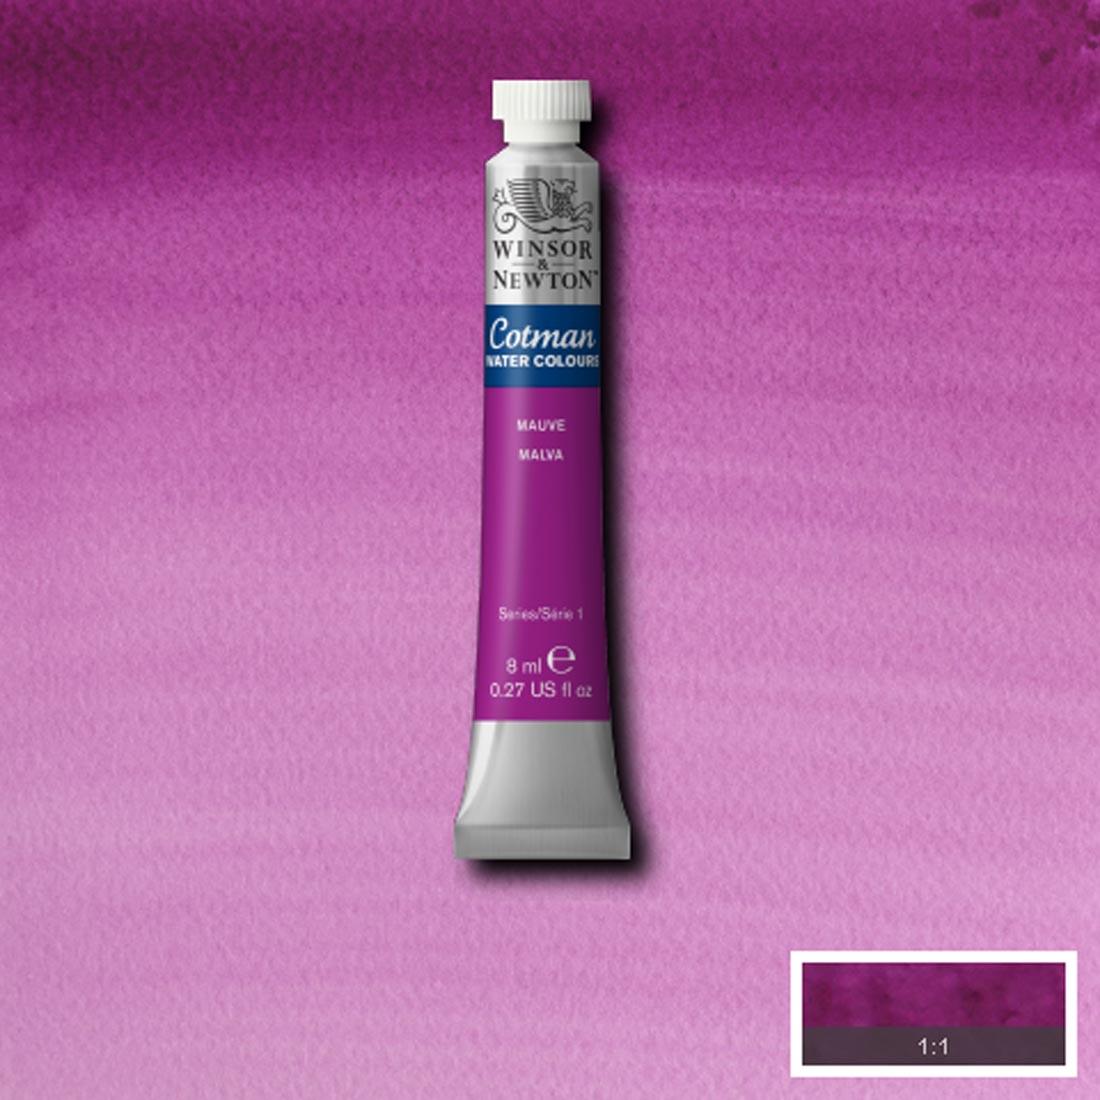 Tube of Mauve Winsor and Newton Cotman Water Colour with a paint swatch for the background